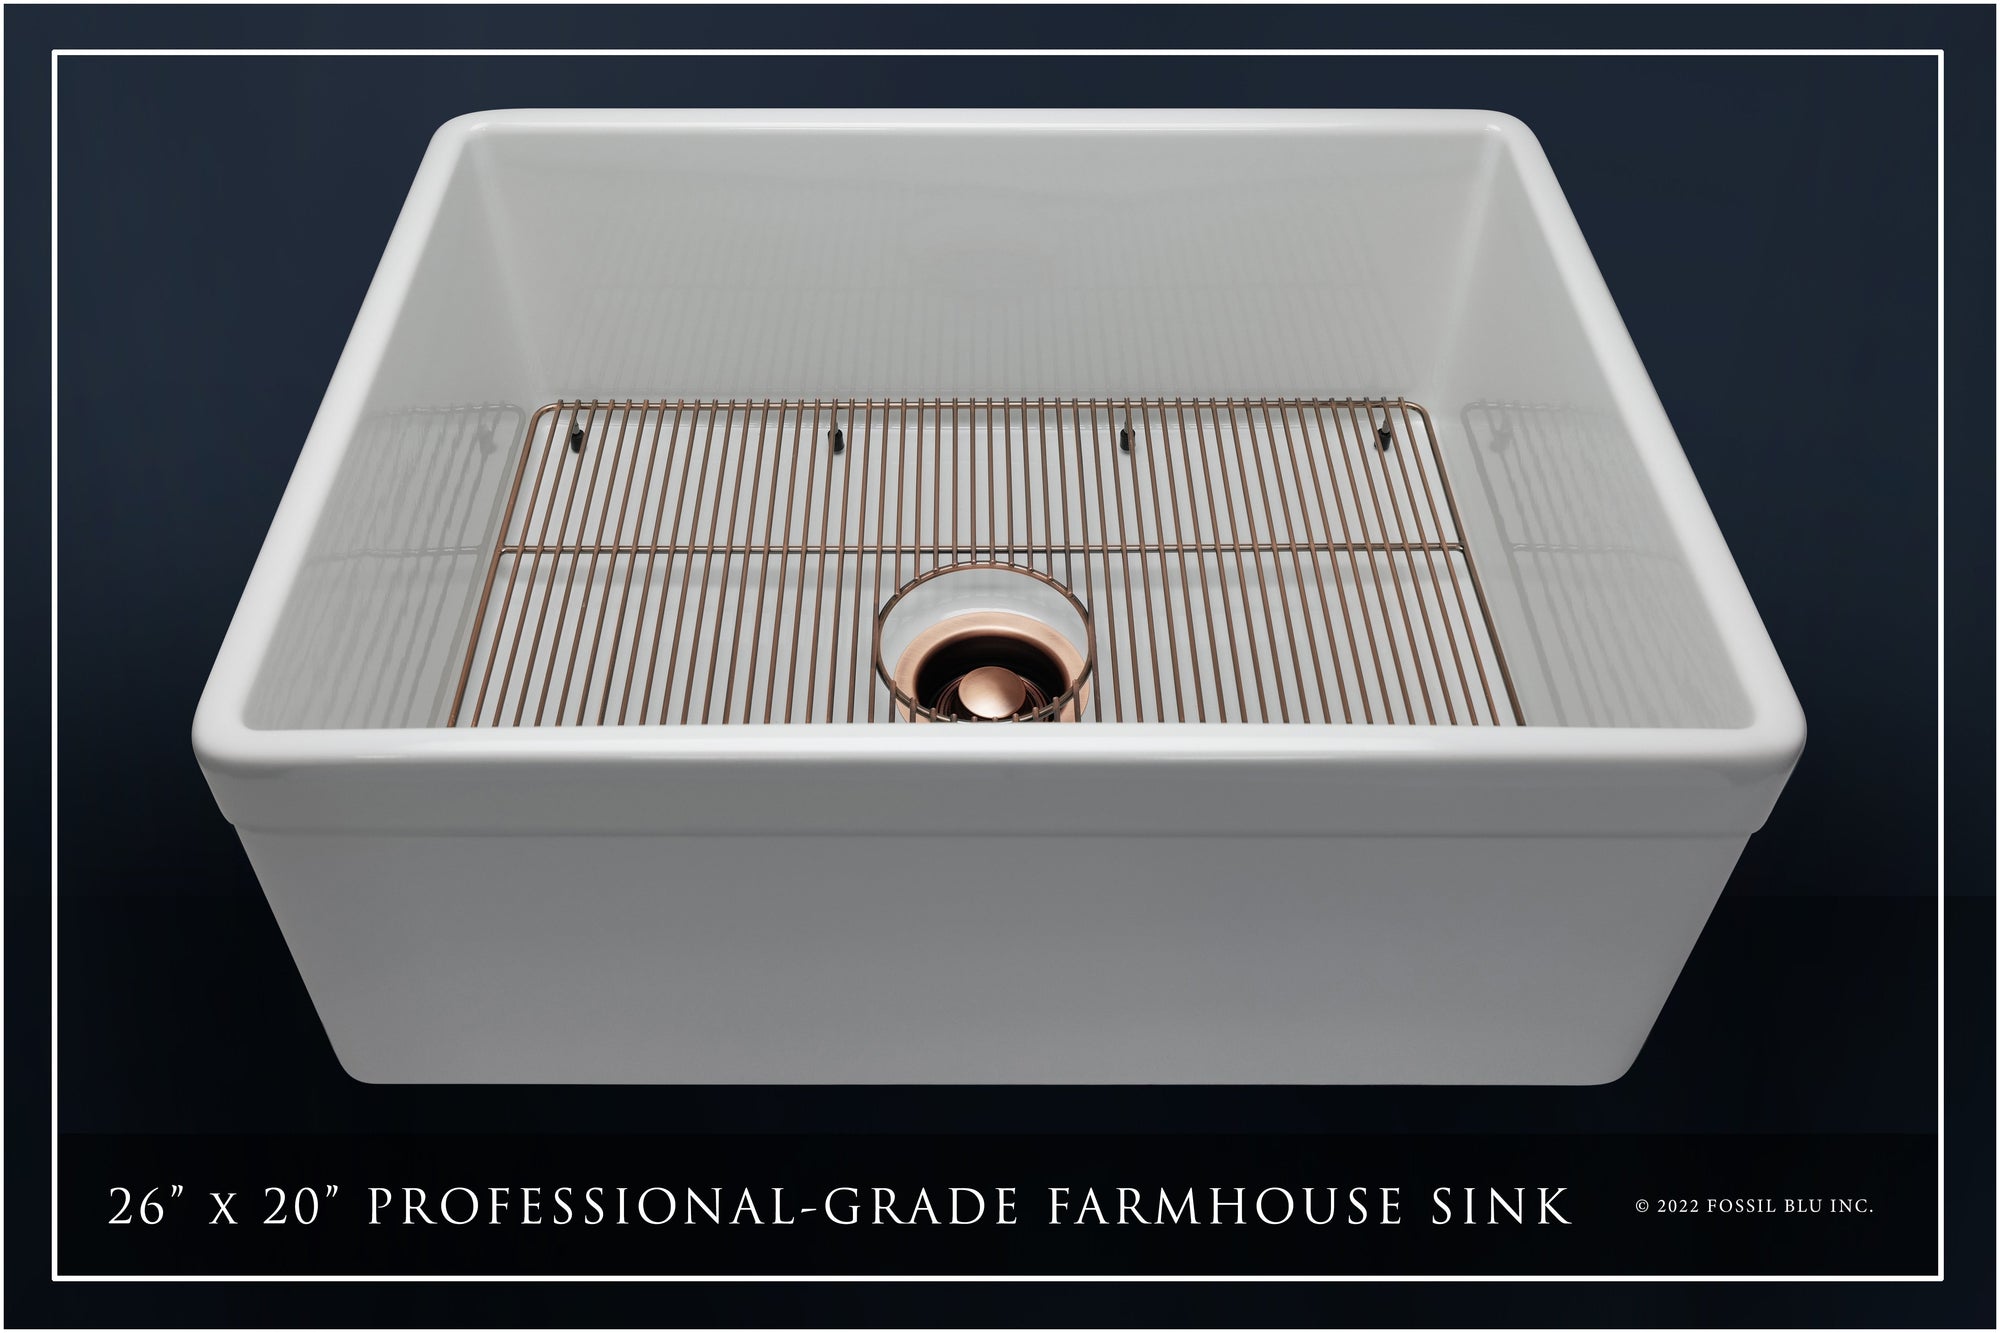 FSW1010AC LUXURY 26-INCH SOLID FIRECLAY FARMHOUSE SINK IN WHITE, ANTIQUE COPPER ACCS, BELTED FRONT